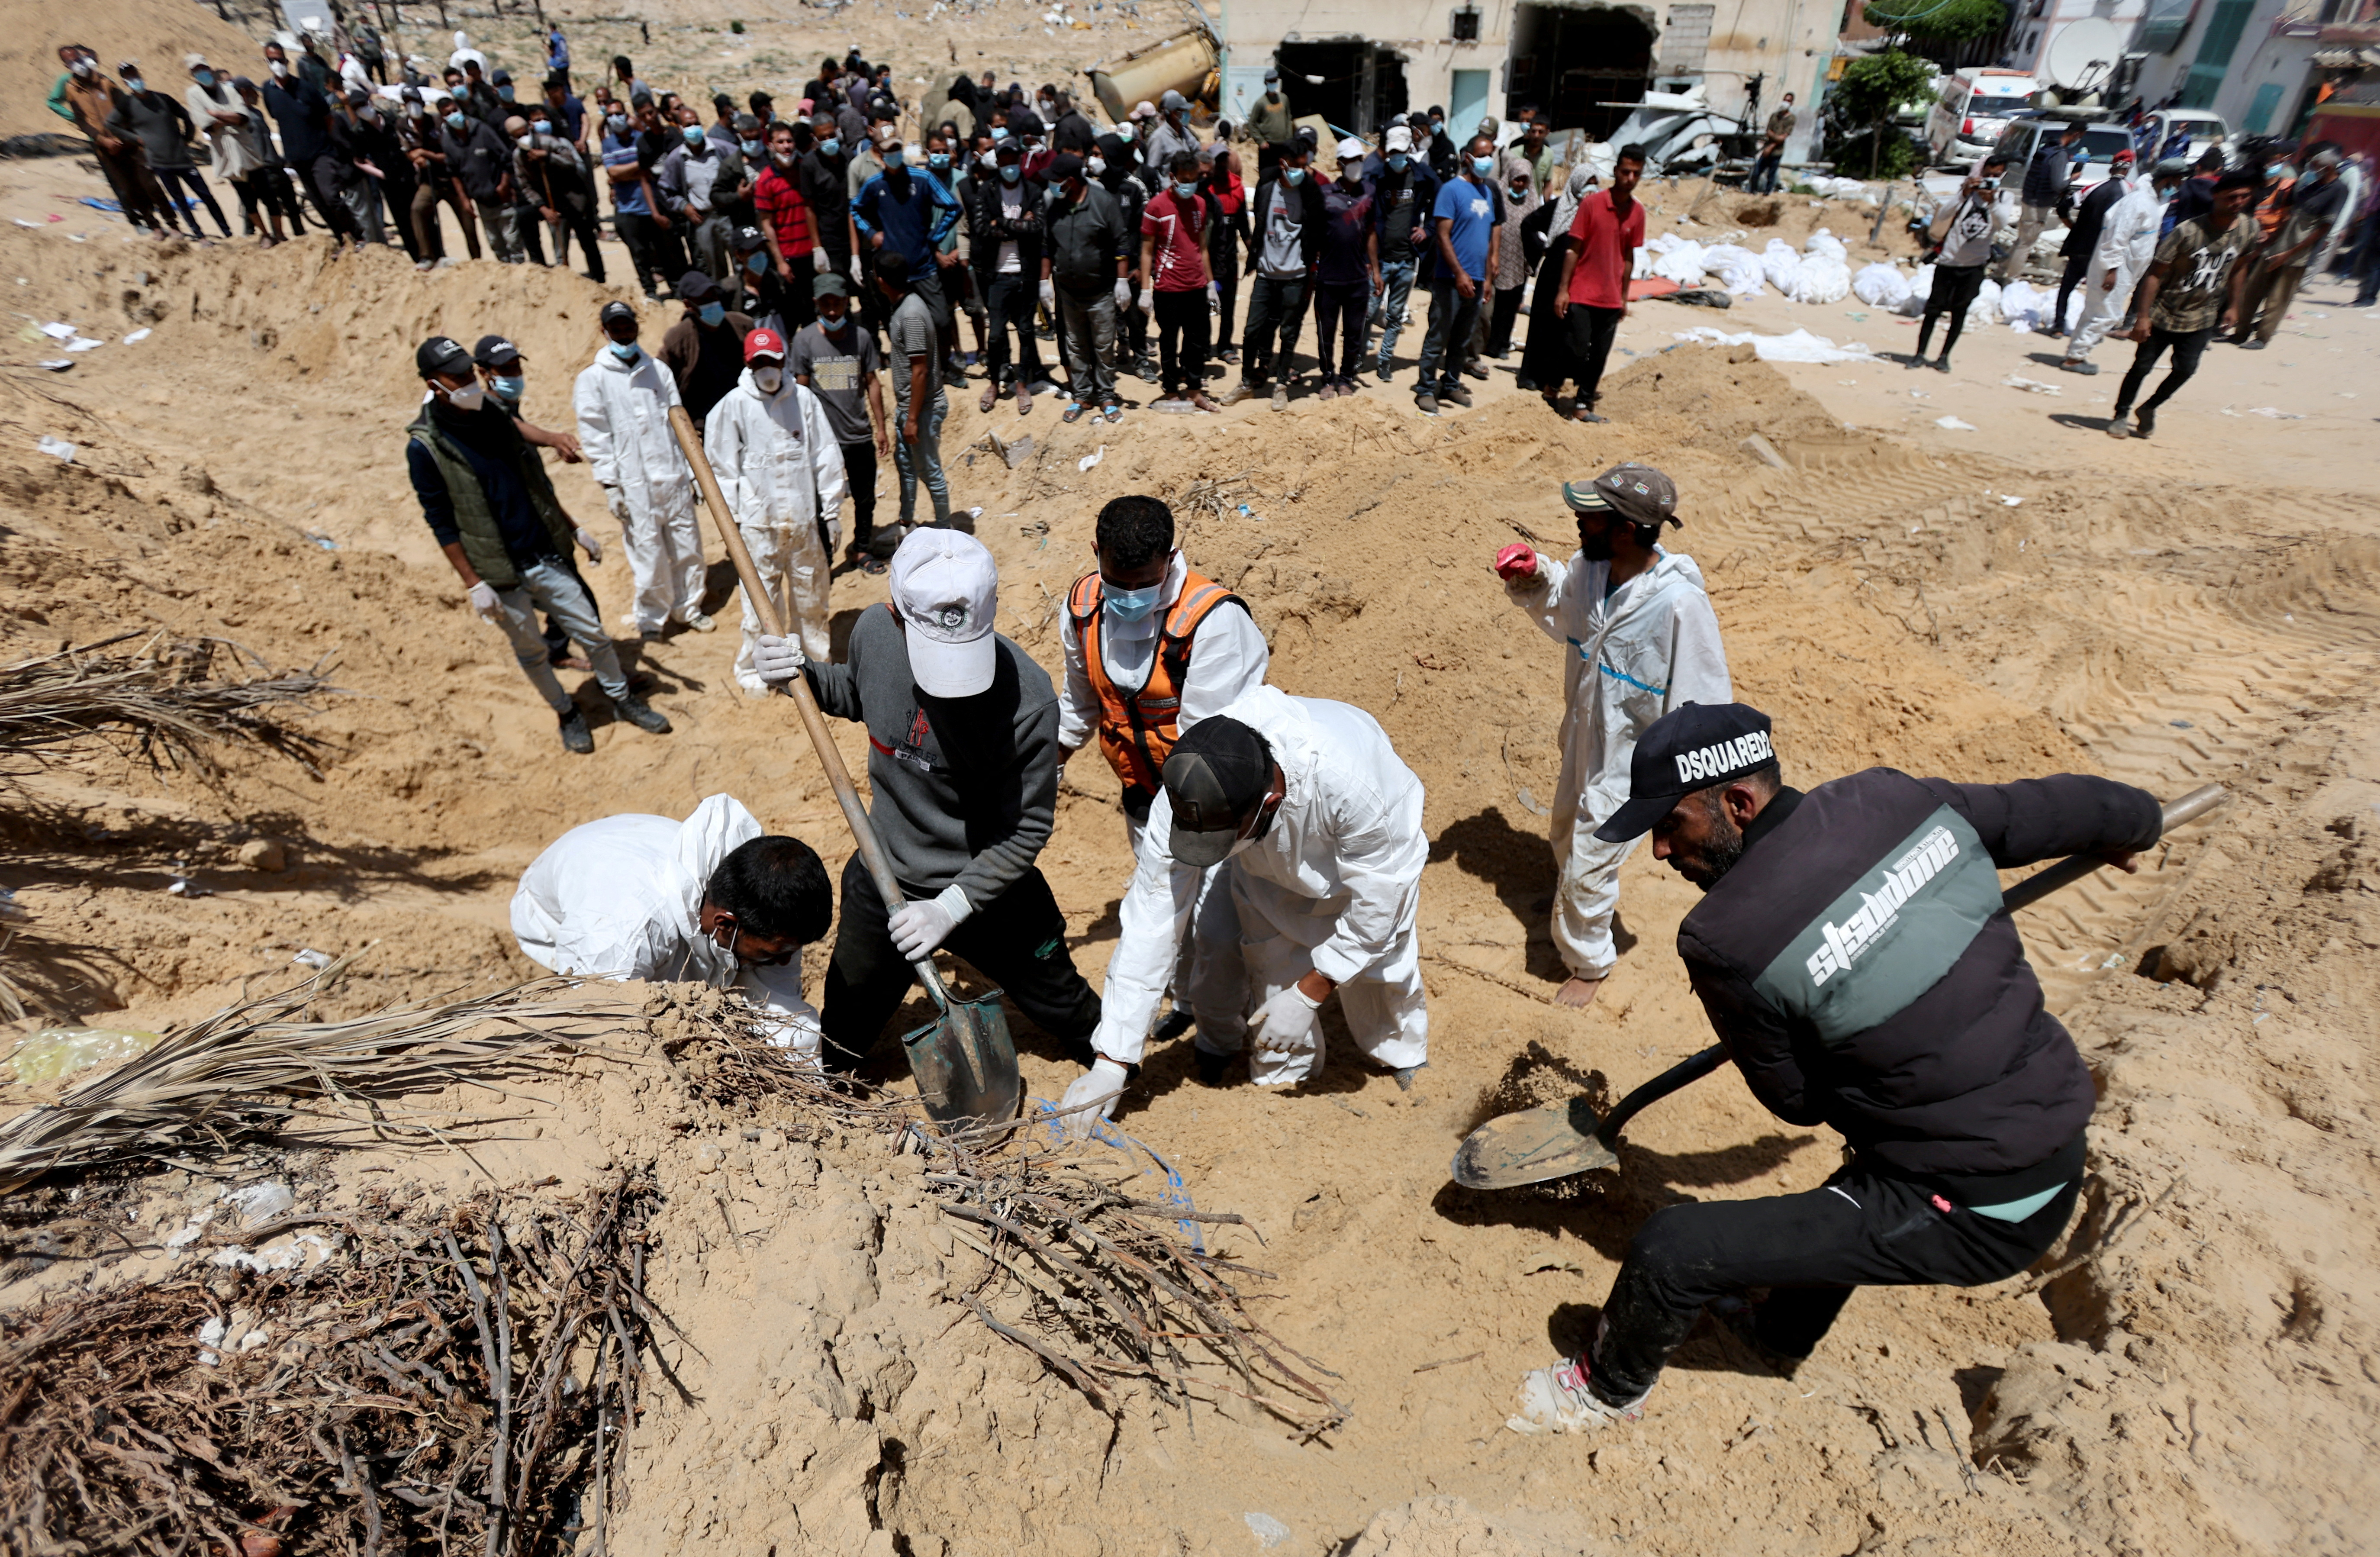 People work to move into a cemetery bodies of Palestinians killed during Israel's military offensive and buried at Nasser hospital, in Khan Younis